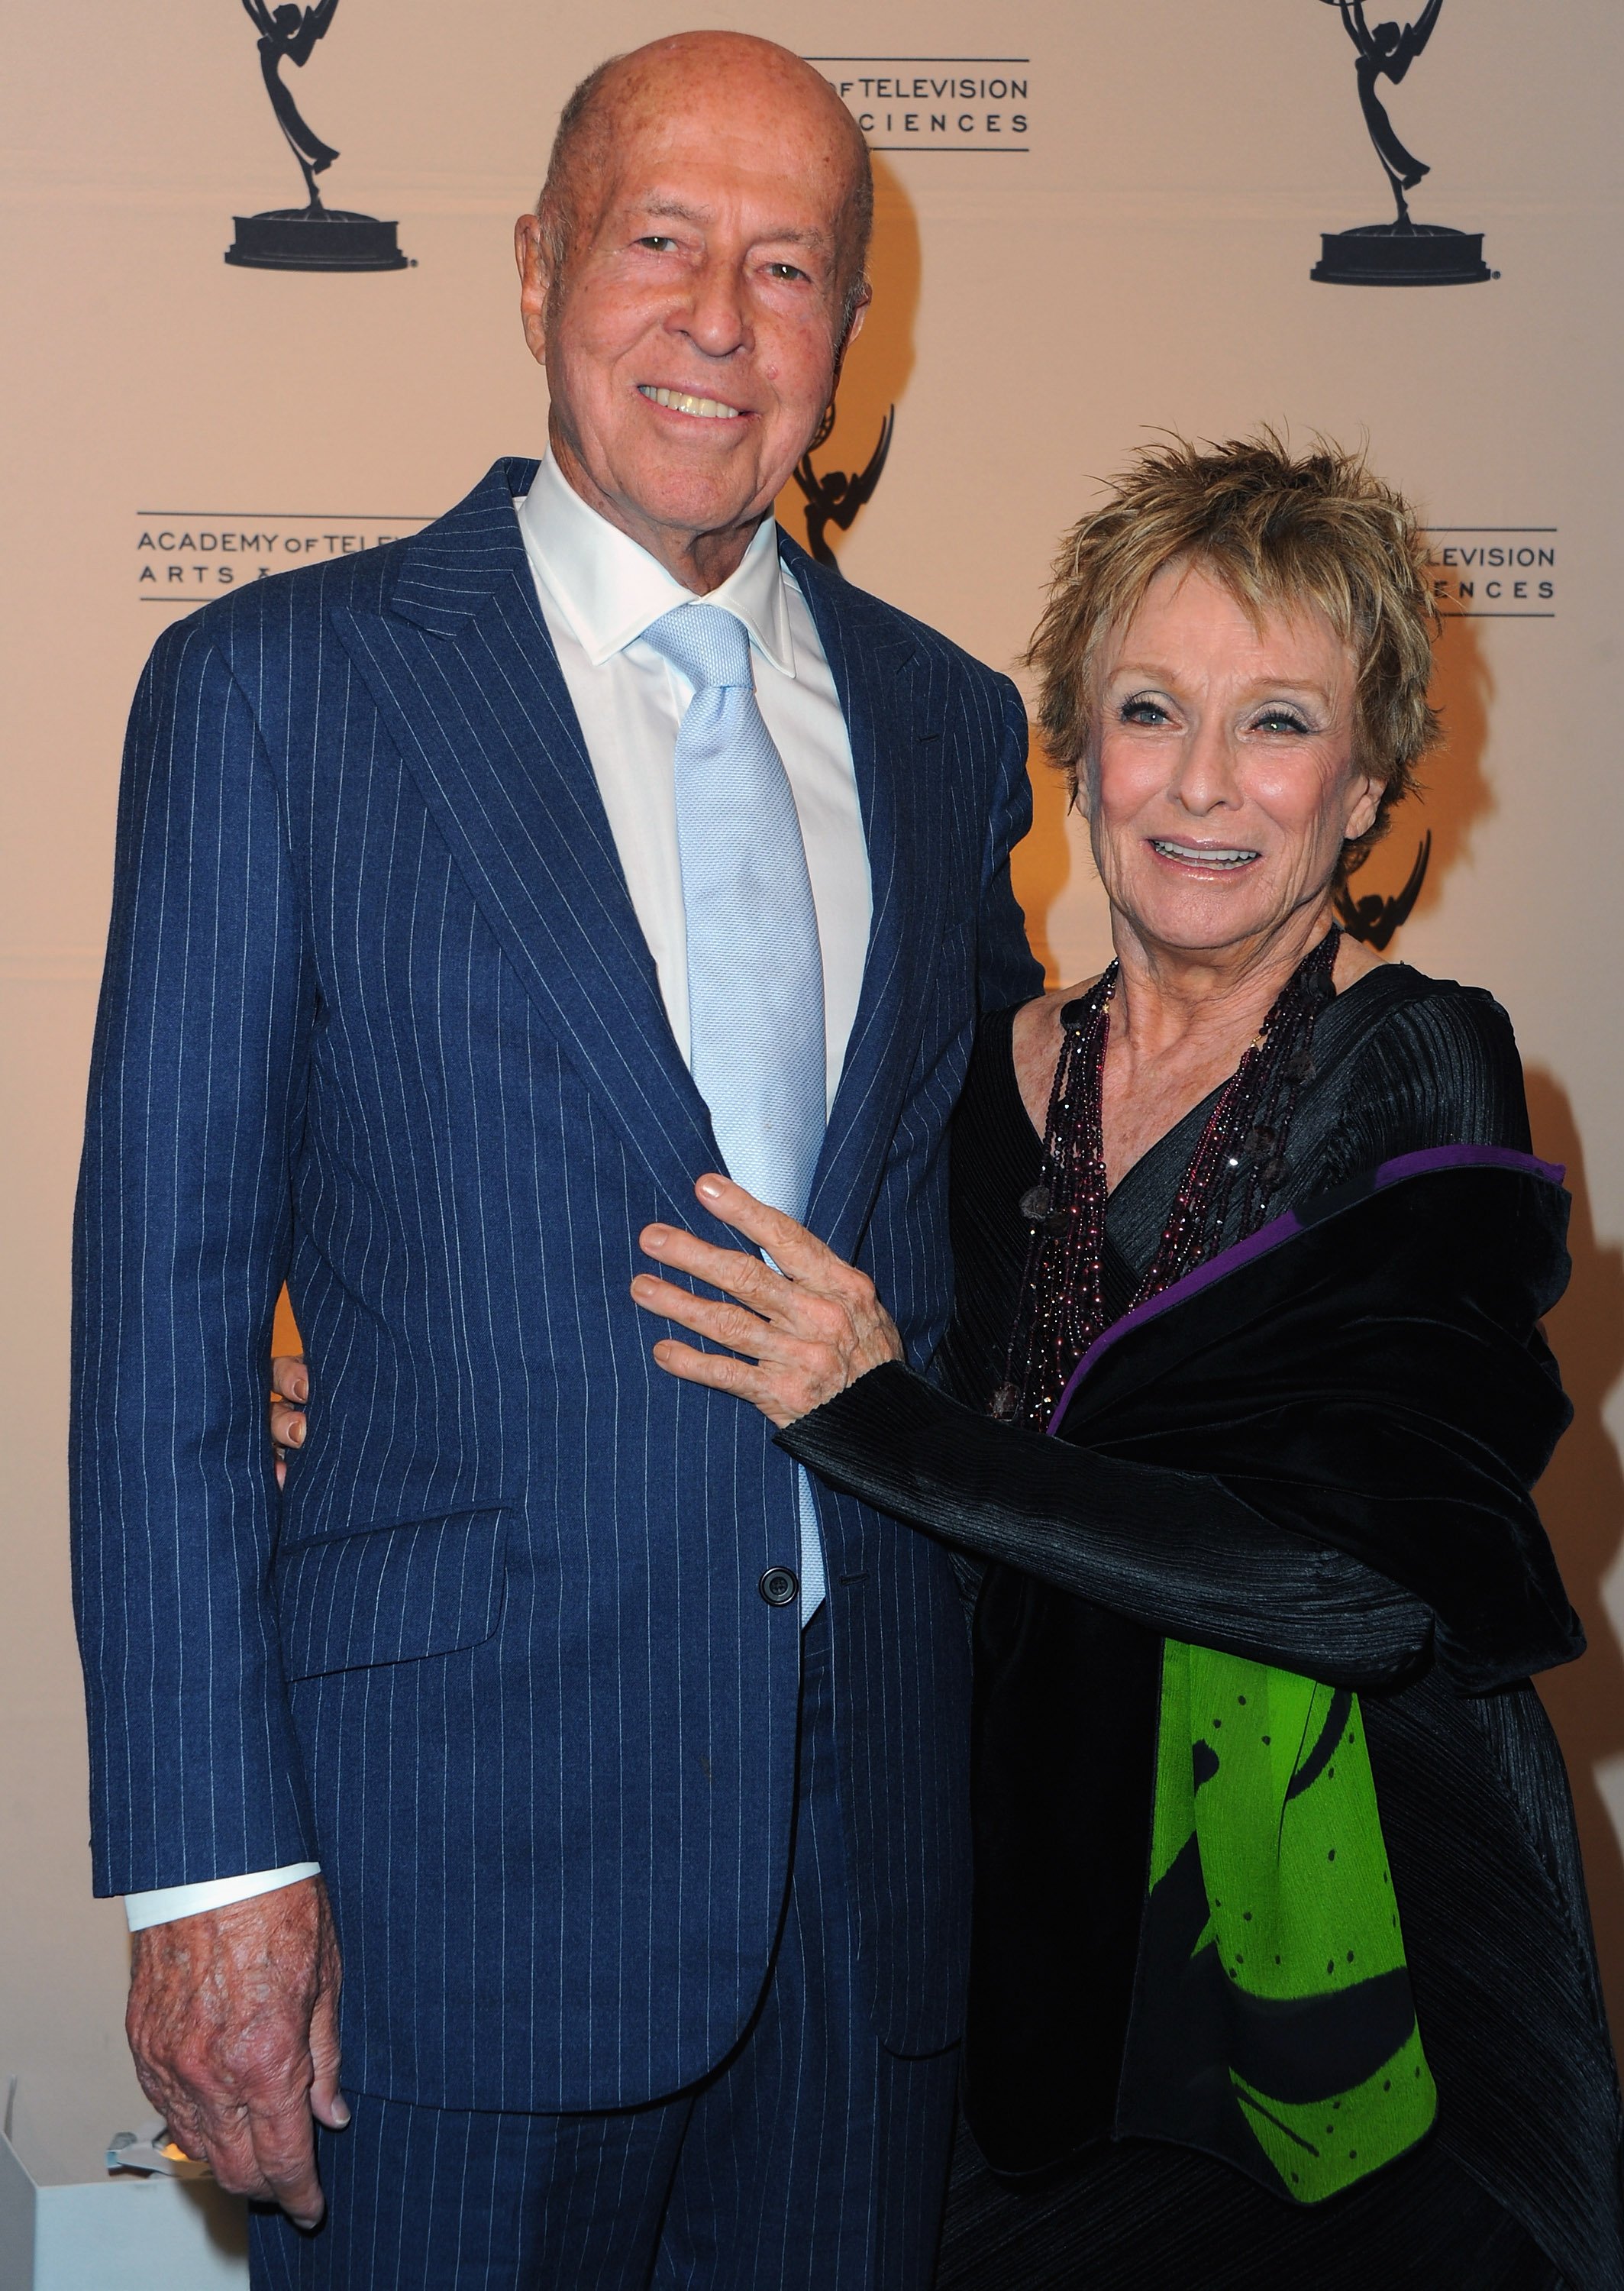 Director George Englund and his wife Cloris Leachman arriving at the Academy of Television Arts & Sciences' Hall of Fame Committe's 20th Annual Induction Gala on January 20, 2011 in Beverly Hills, California. / Source: Getty Images